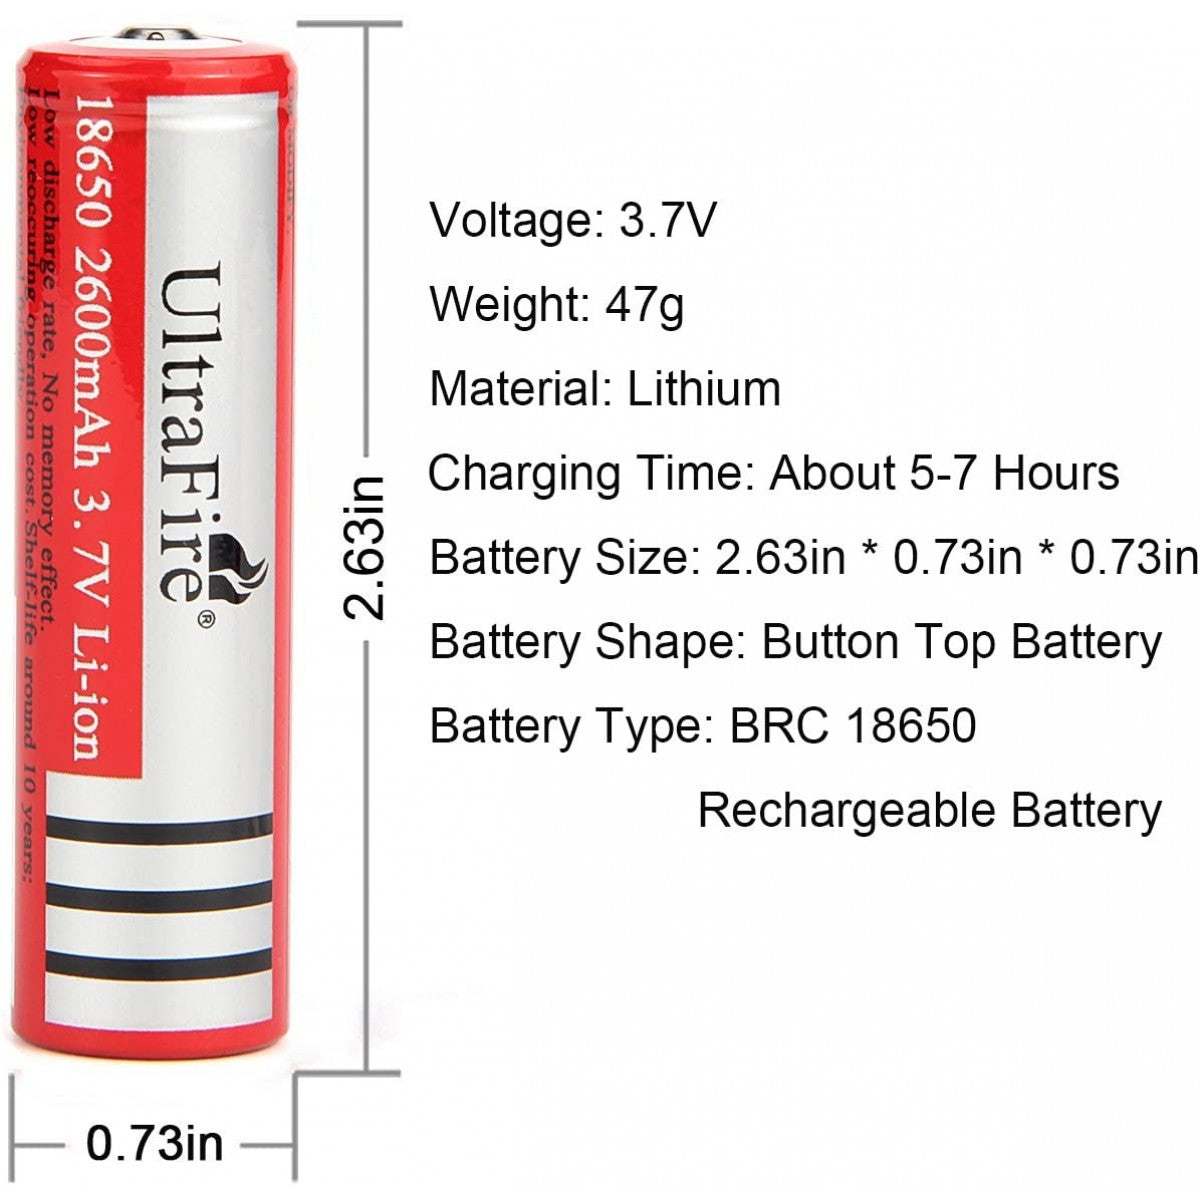 UltraLast Lithium Ion 18650 3.7 V 2600 mAh Rechargeable Battery  UL1865-26-1P 1 pk - Ace Hardware